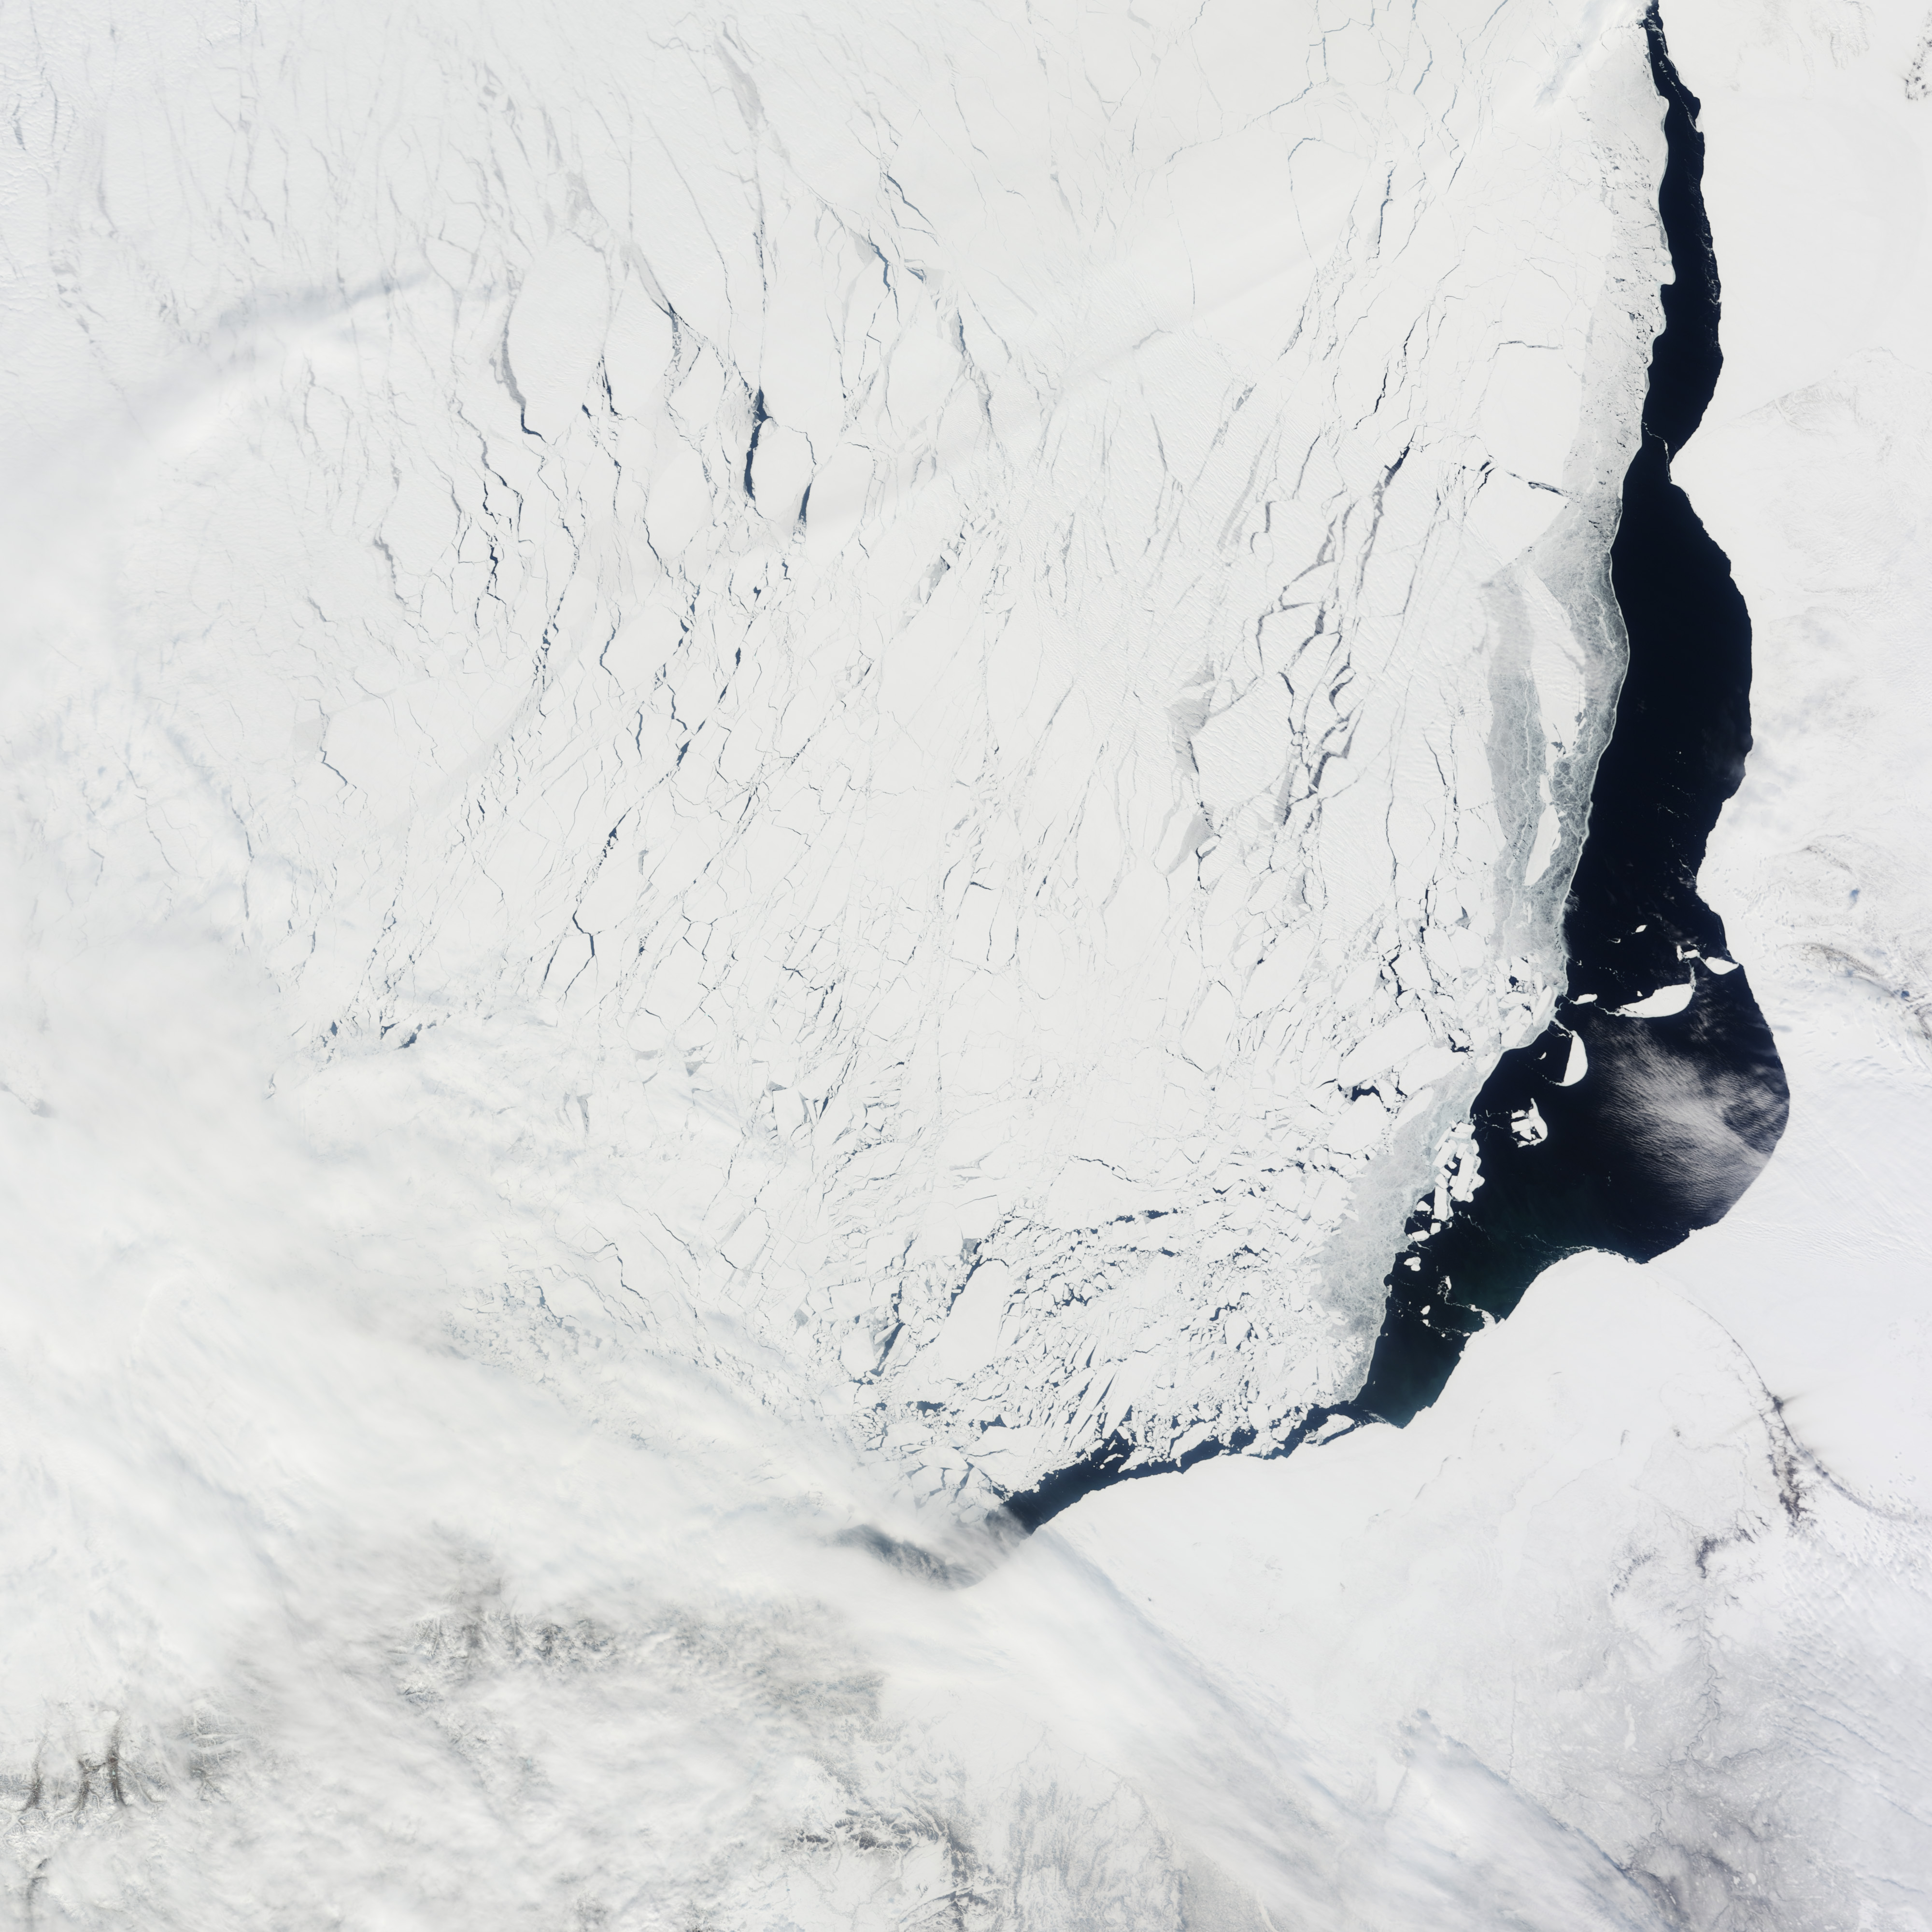 Sea Ice Retreat in the Beaufort Sea - related image preview